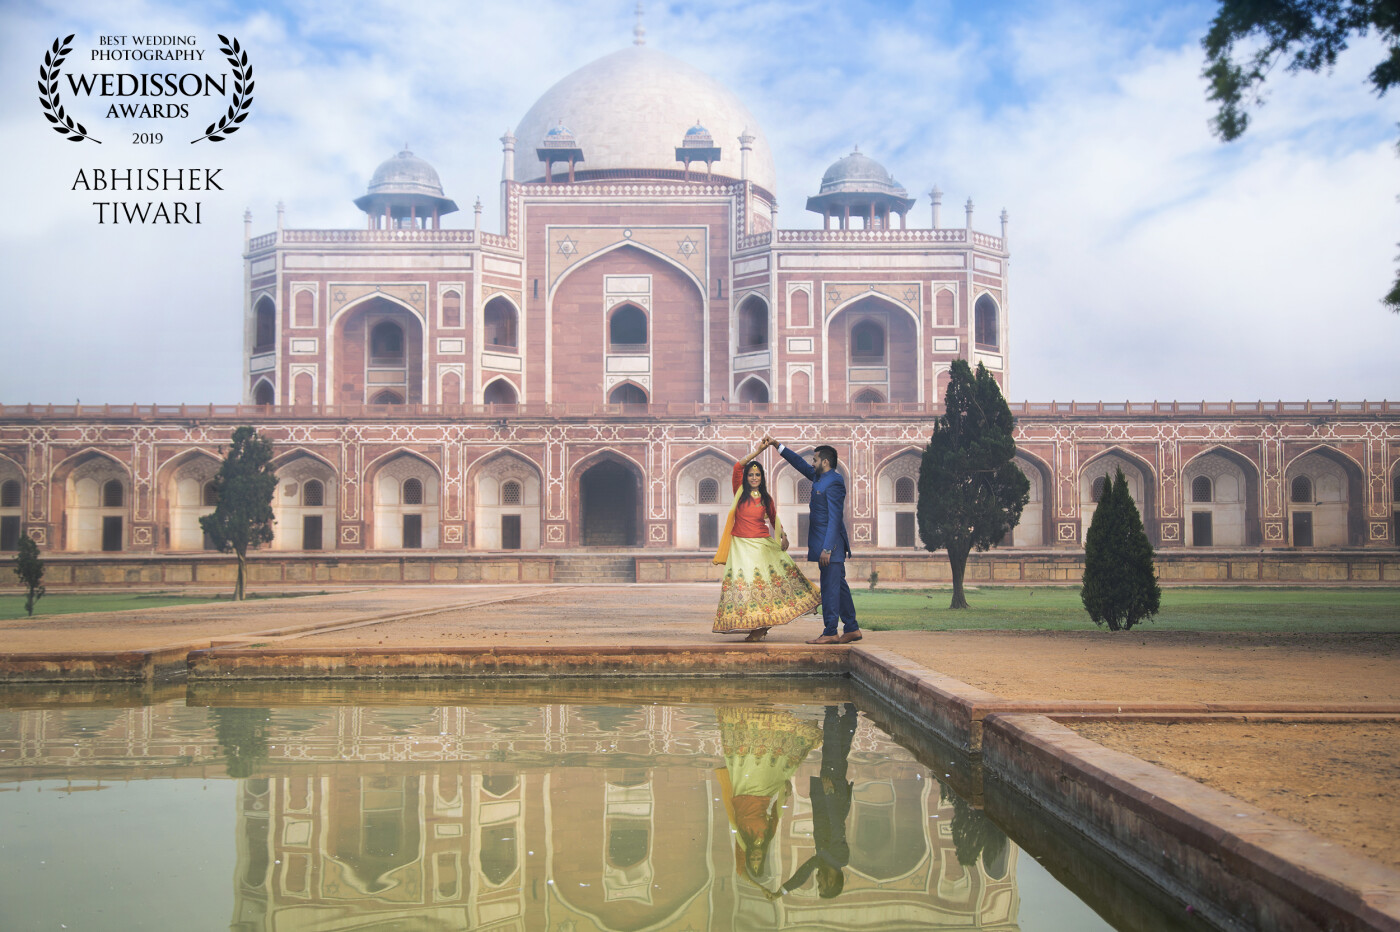 Every love story deserves to be captured with beautiful, dreamy and romantic pictures, and what could be more magical than this beautiful tomb of historical city - Delhi!